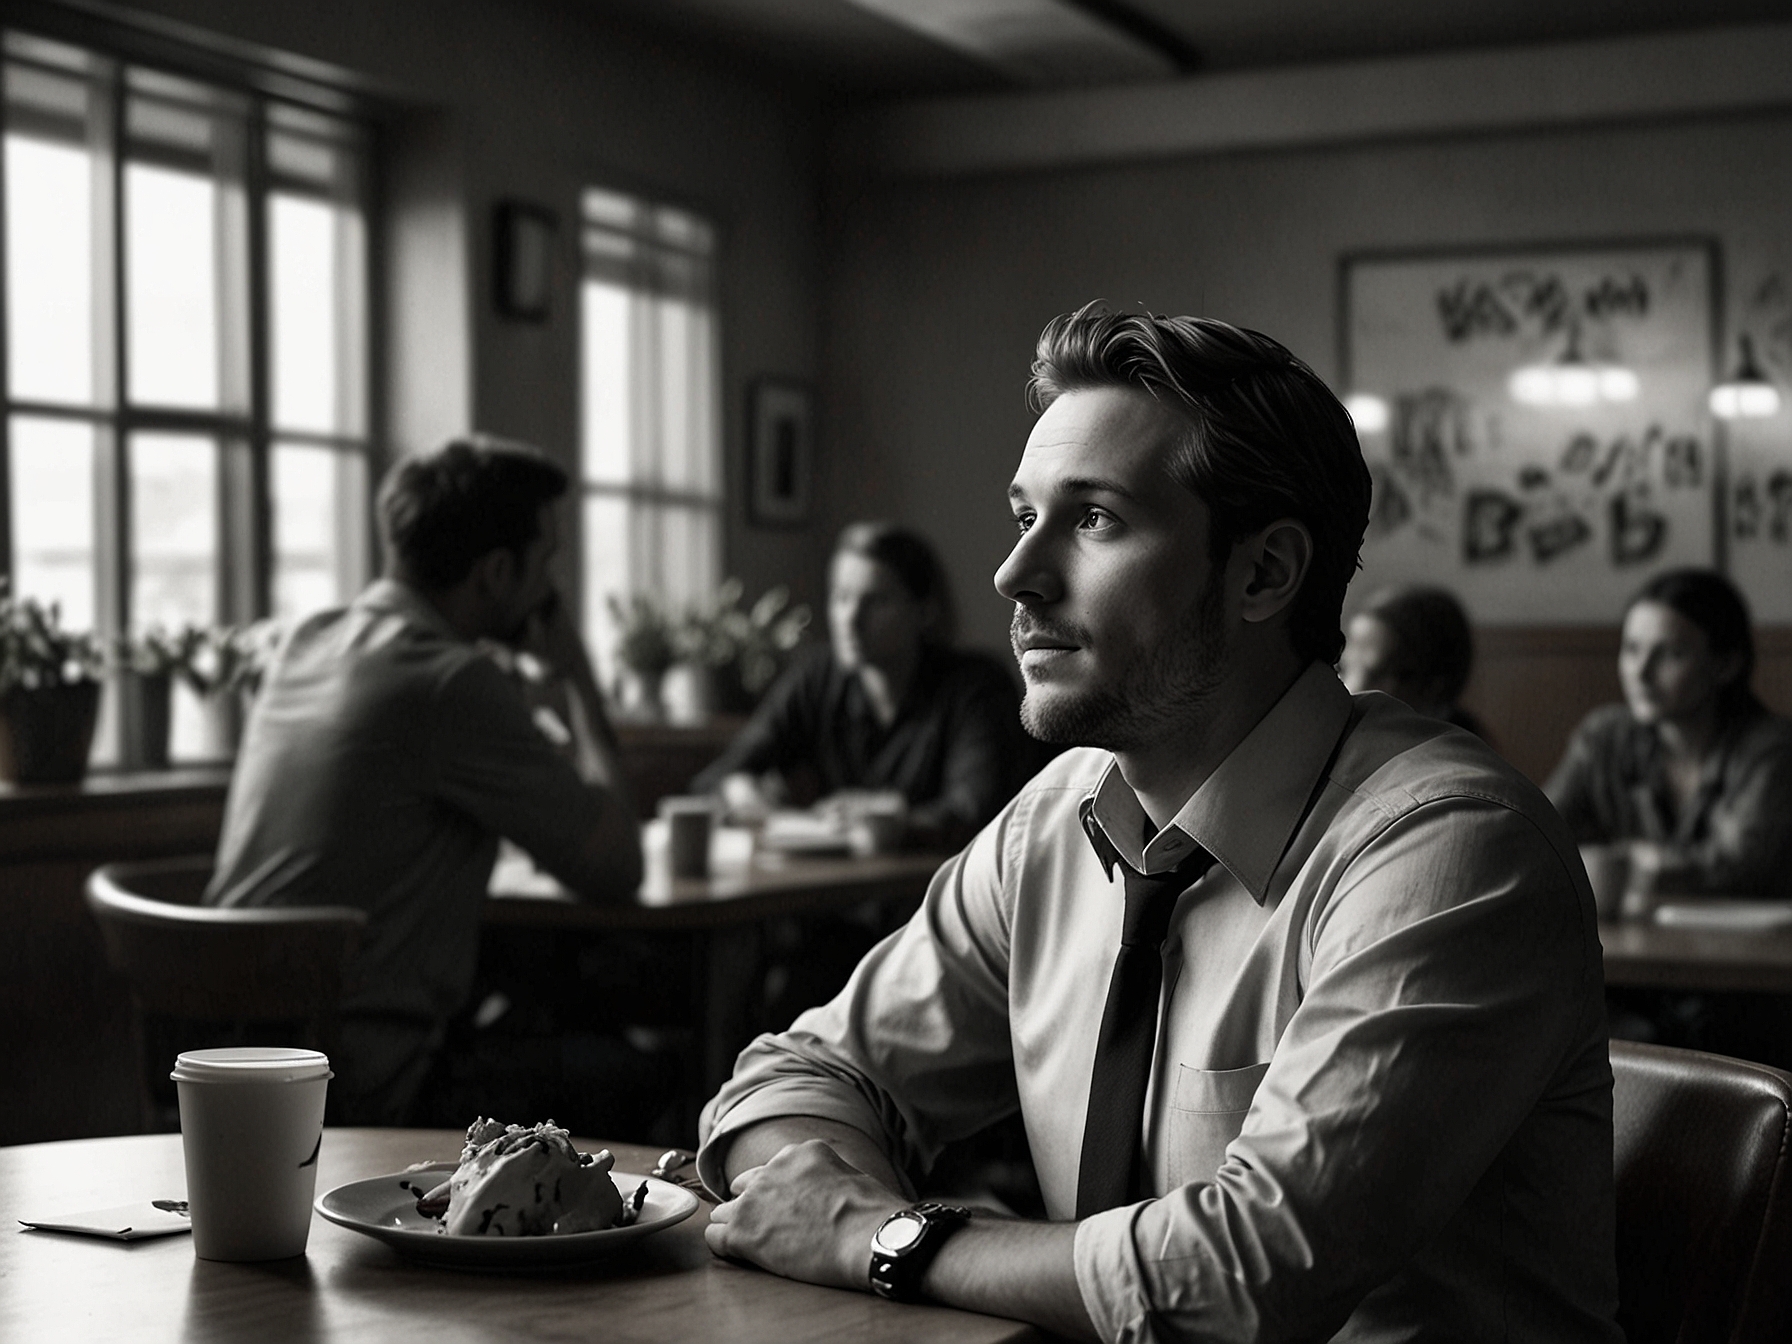 Marcus interacts with coworkers in the bustling restaurant atmosphere. A fleeting moment of vulnerability is visible, reflecting his internal struggle despite the high-pressure environment.